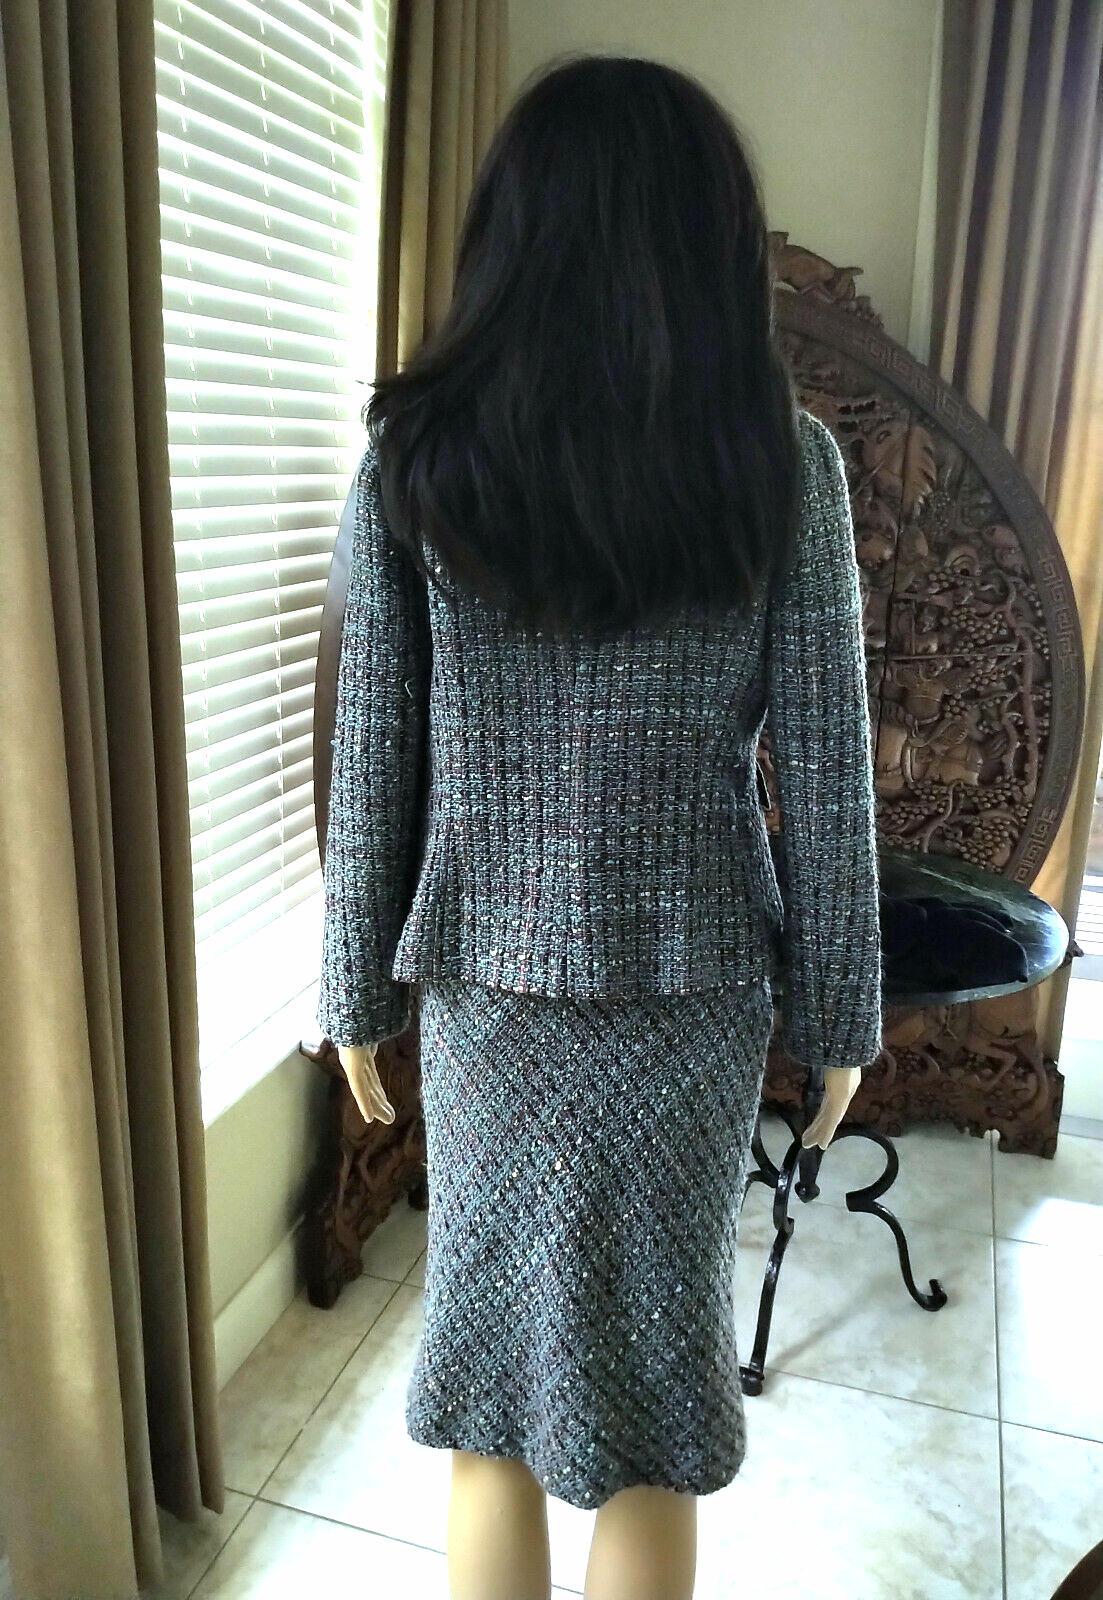 Dolce & Gabbana Aqua & Multi Color Tweed Fox Fur Jacket Skirt Suit IT 40/ US 2 4 In Excellent Condition For Sale In Ormond Beach, FL